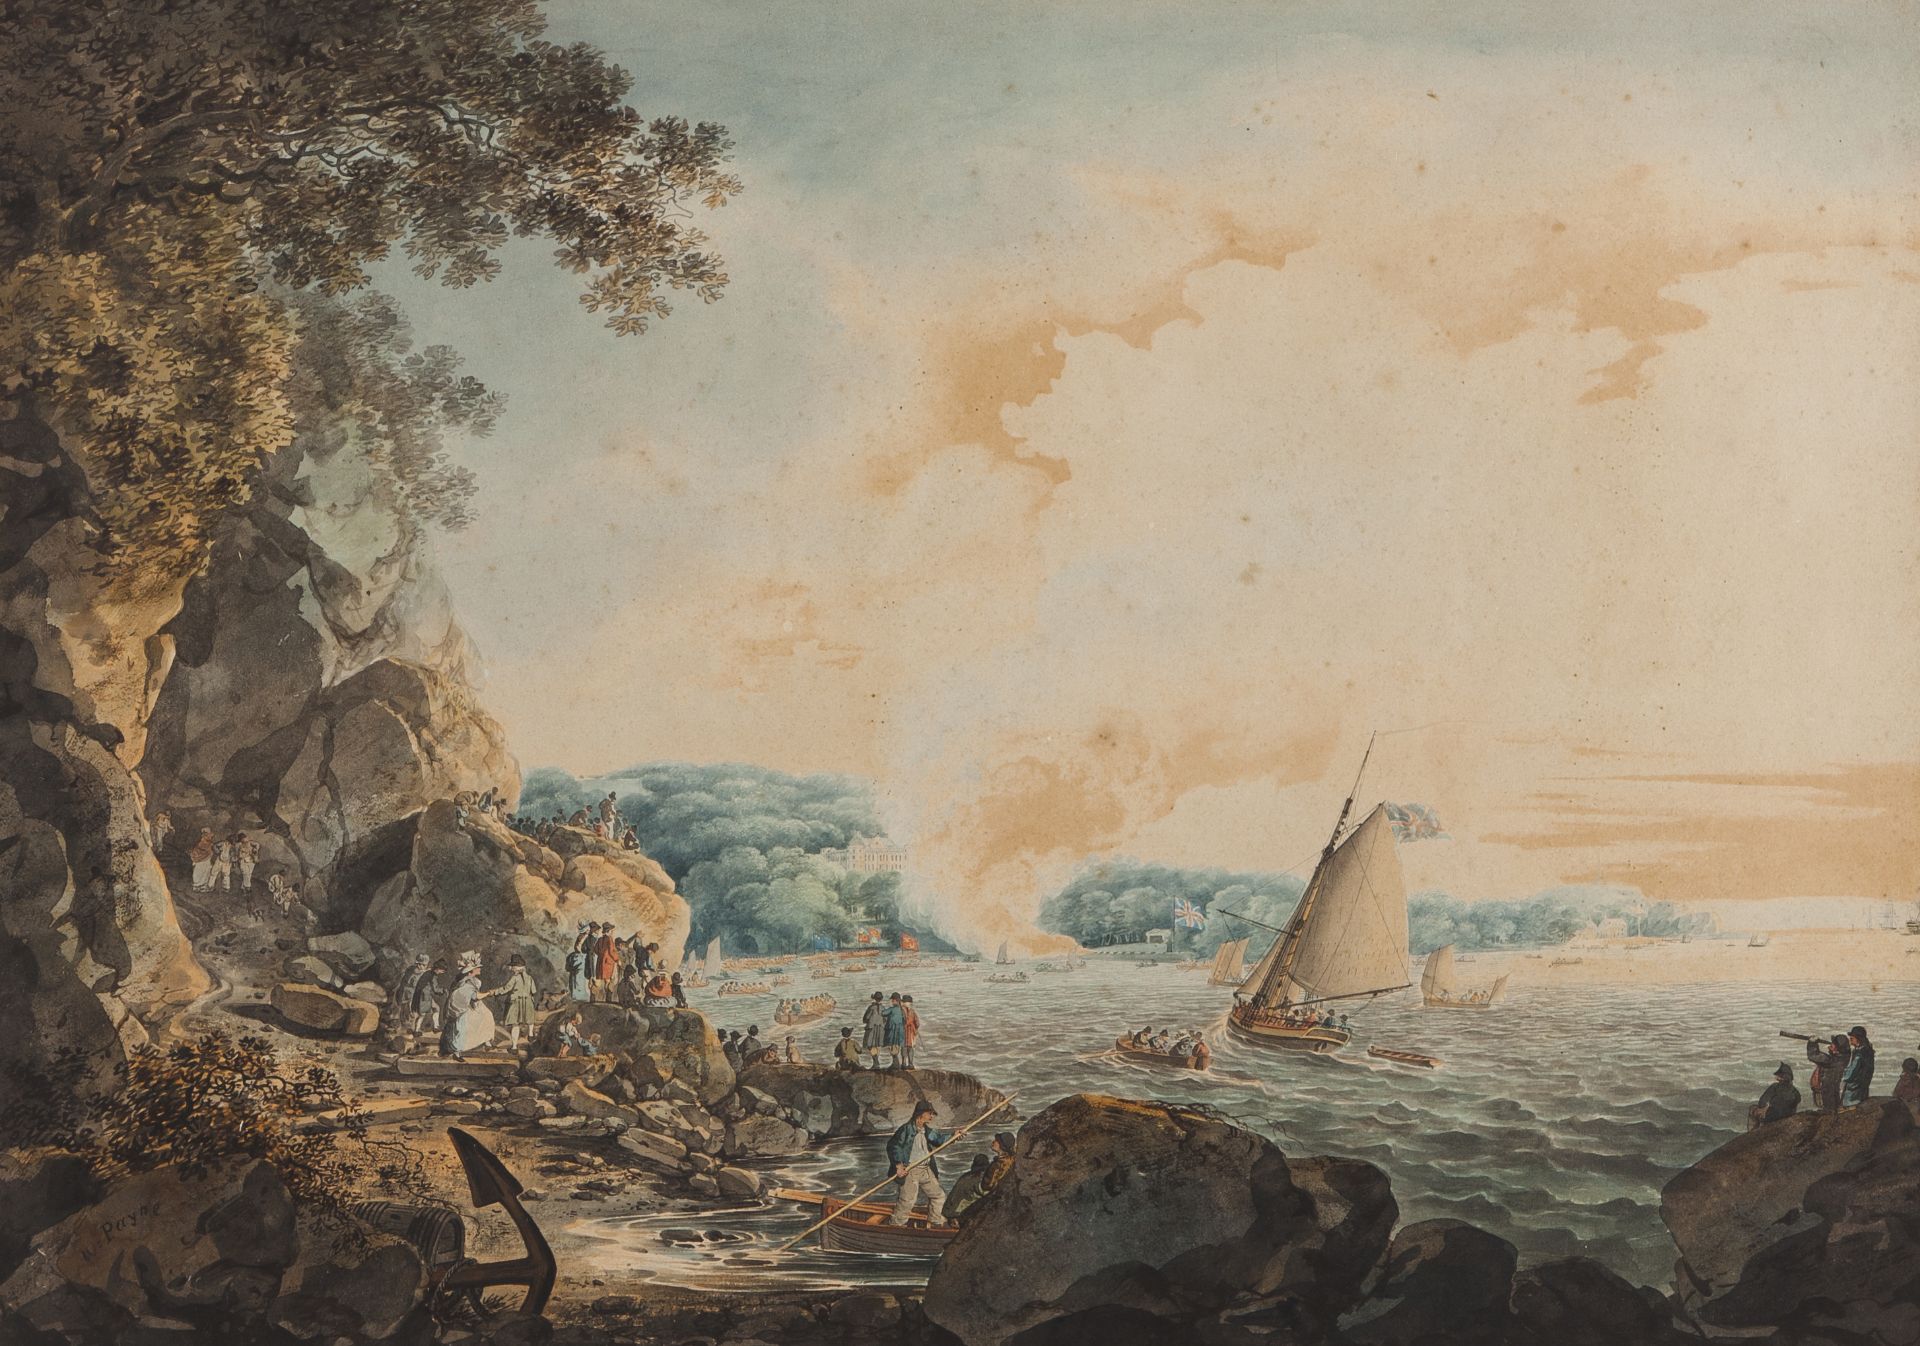 William Payne (1755/60-c.1830)"The landing of their Majesties at Mount Edgecumbe, in August 1789"